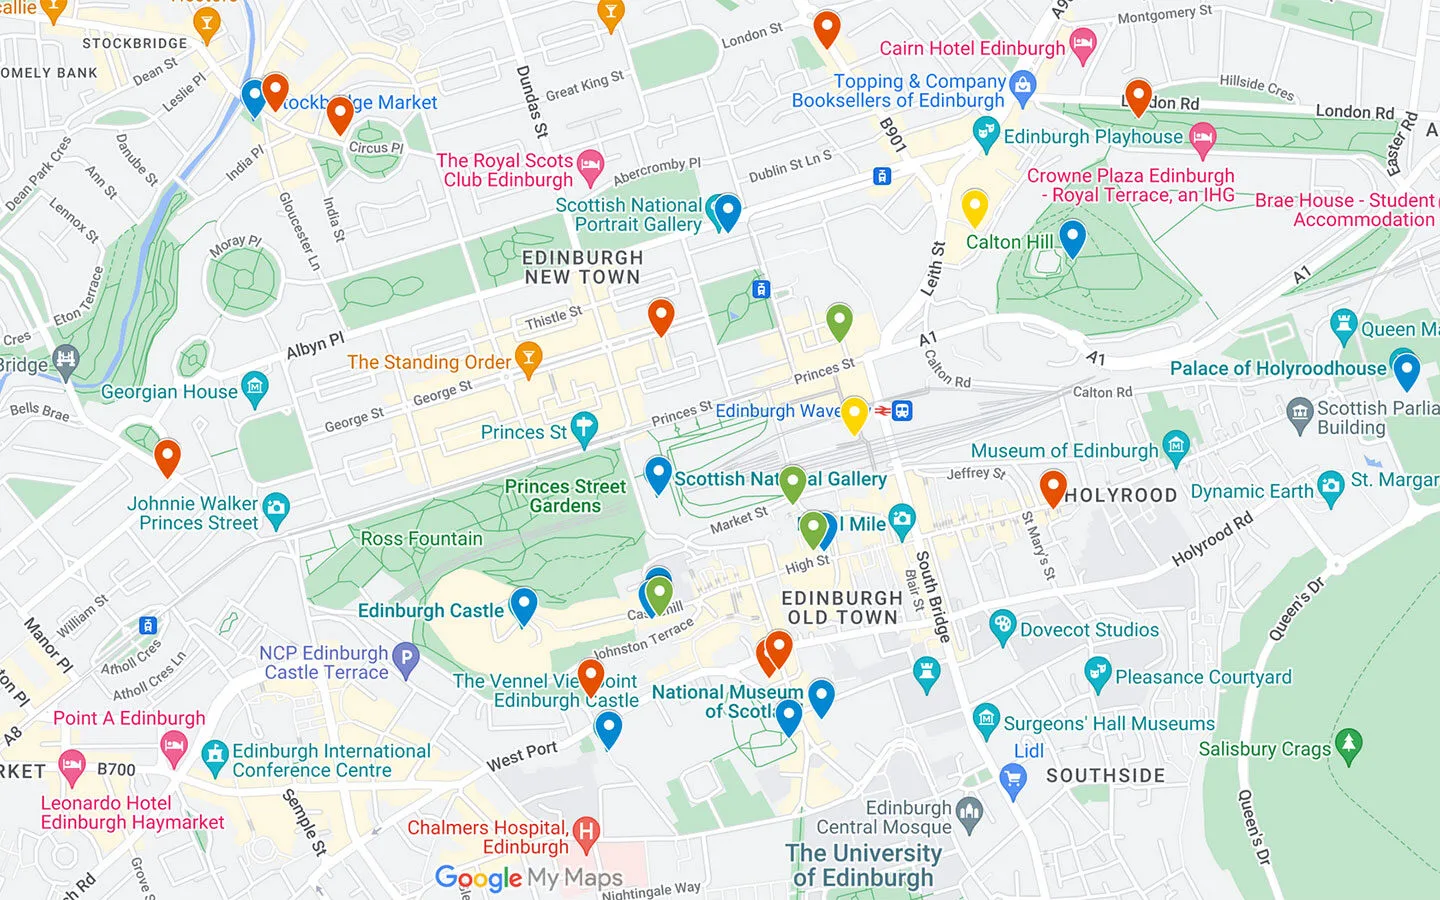 Map of things to do on a weekend in Edinburgh